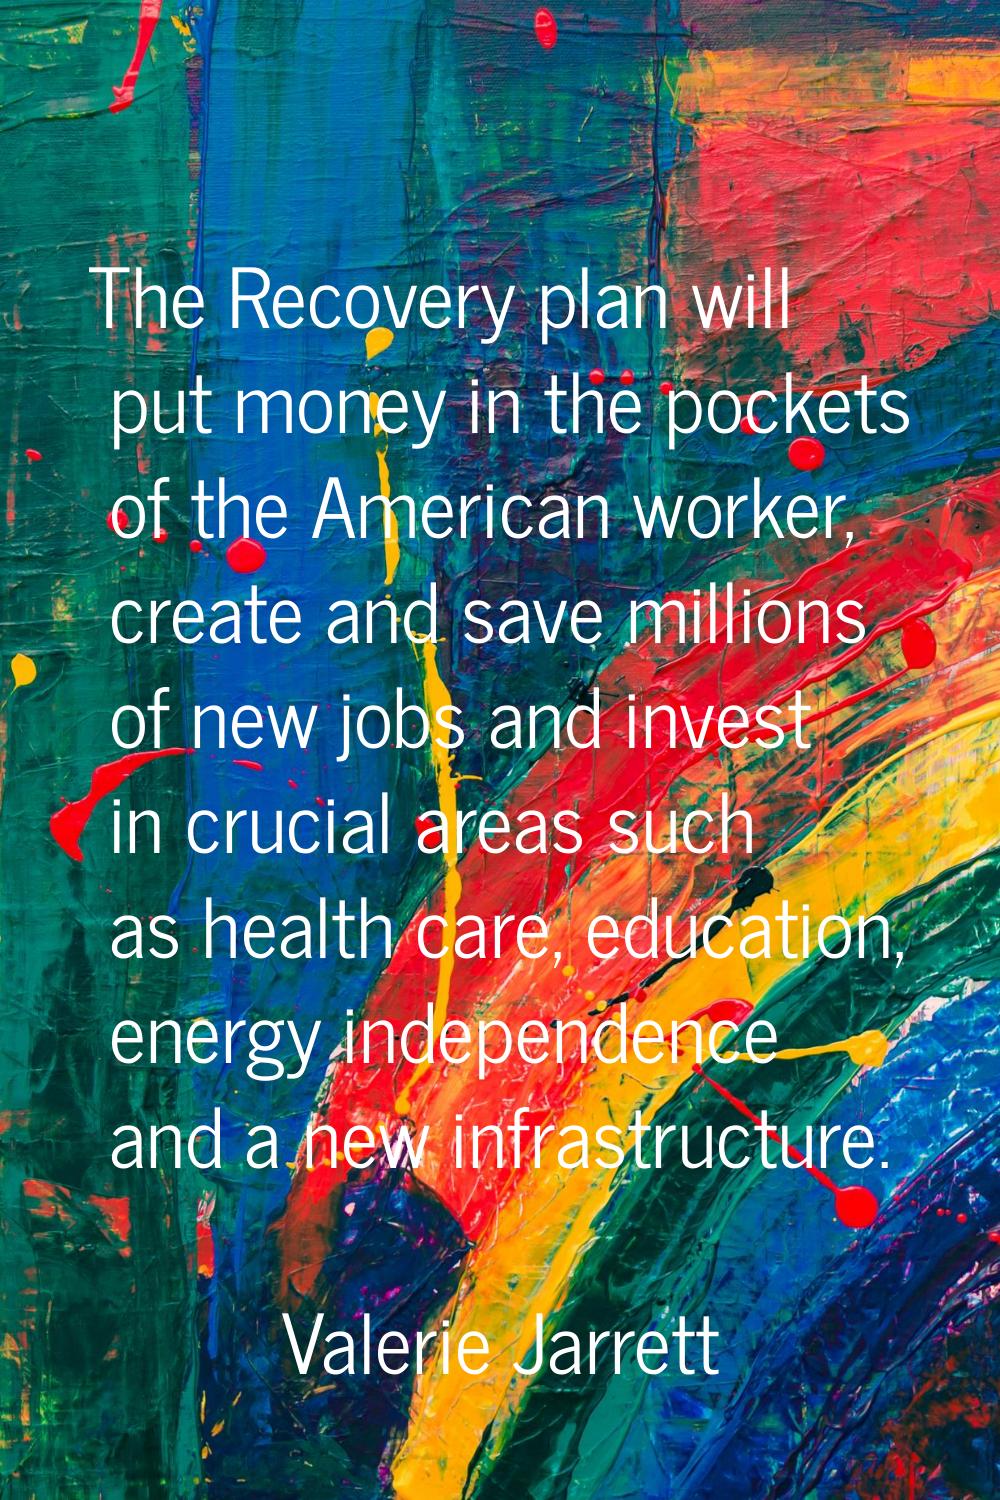 The Recovery plan will put money in the pockets of the American worker, create and save millions of